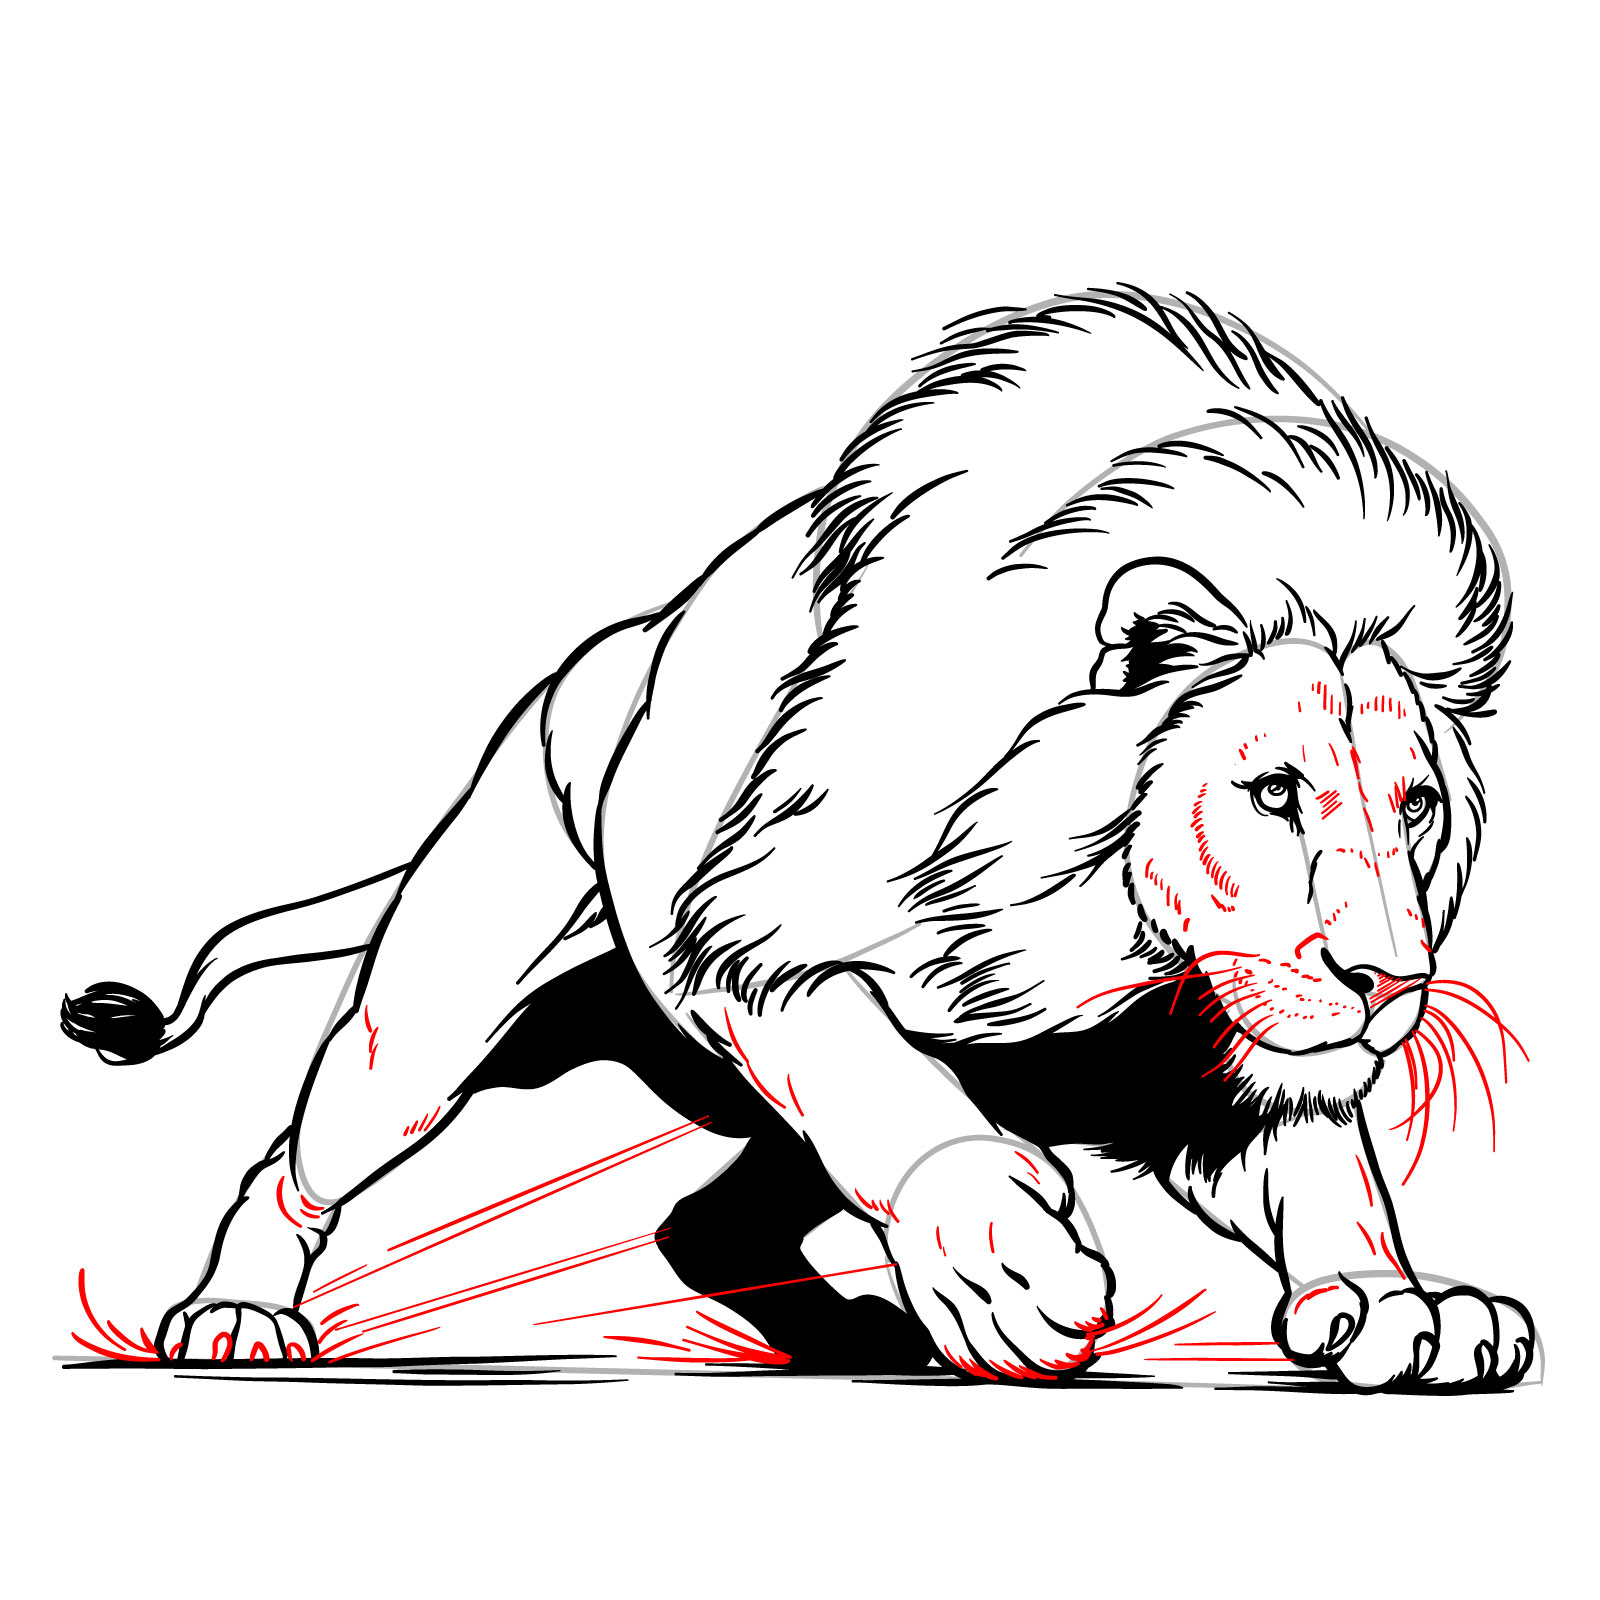 Hunting lion drawing - Step 18: Final detailing